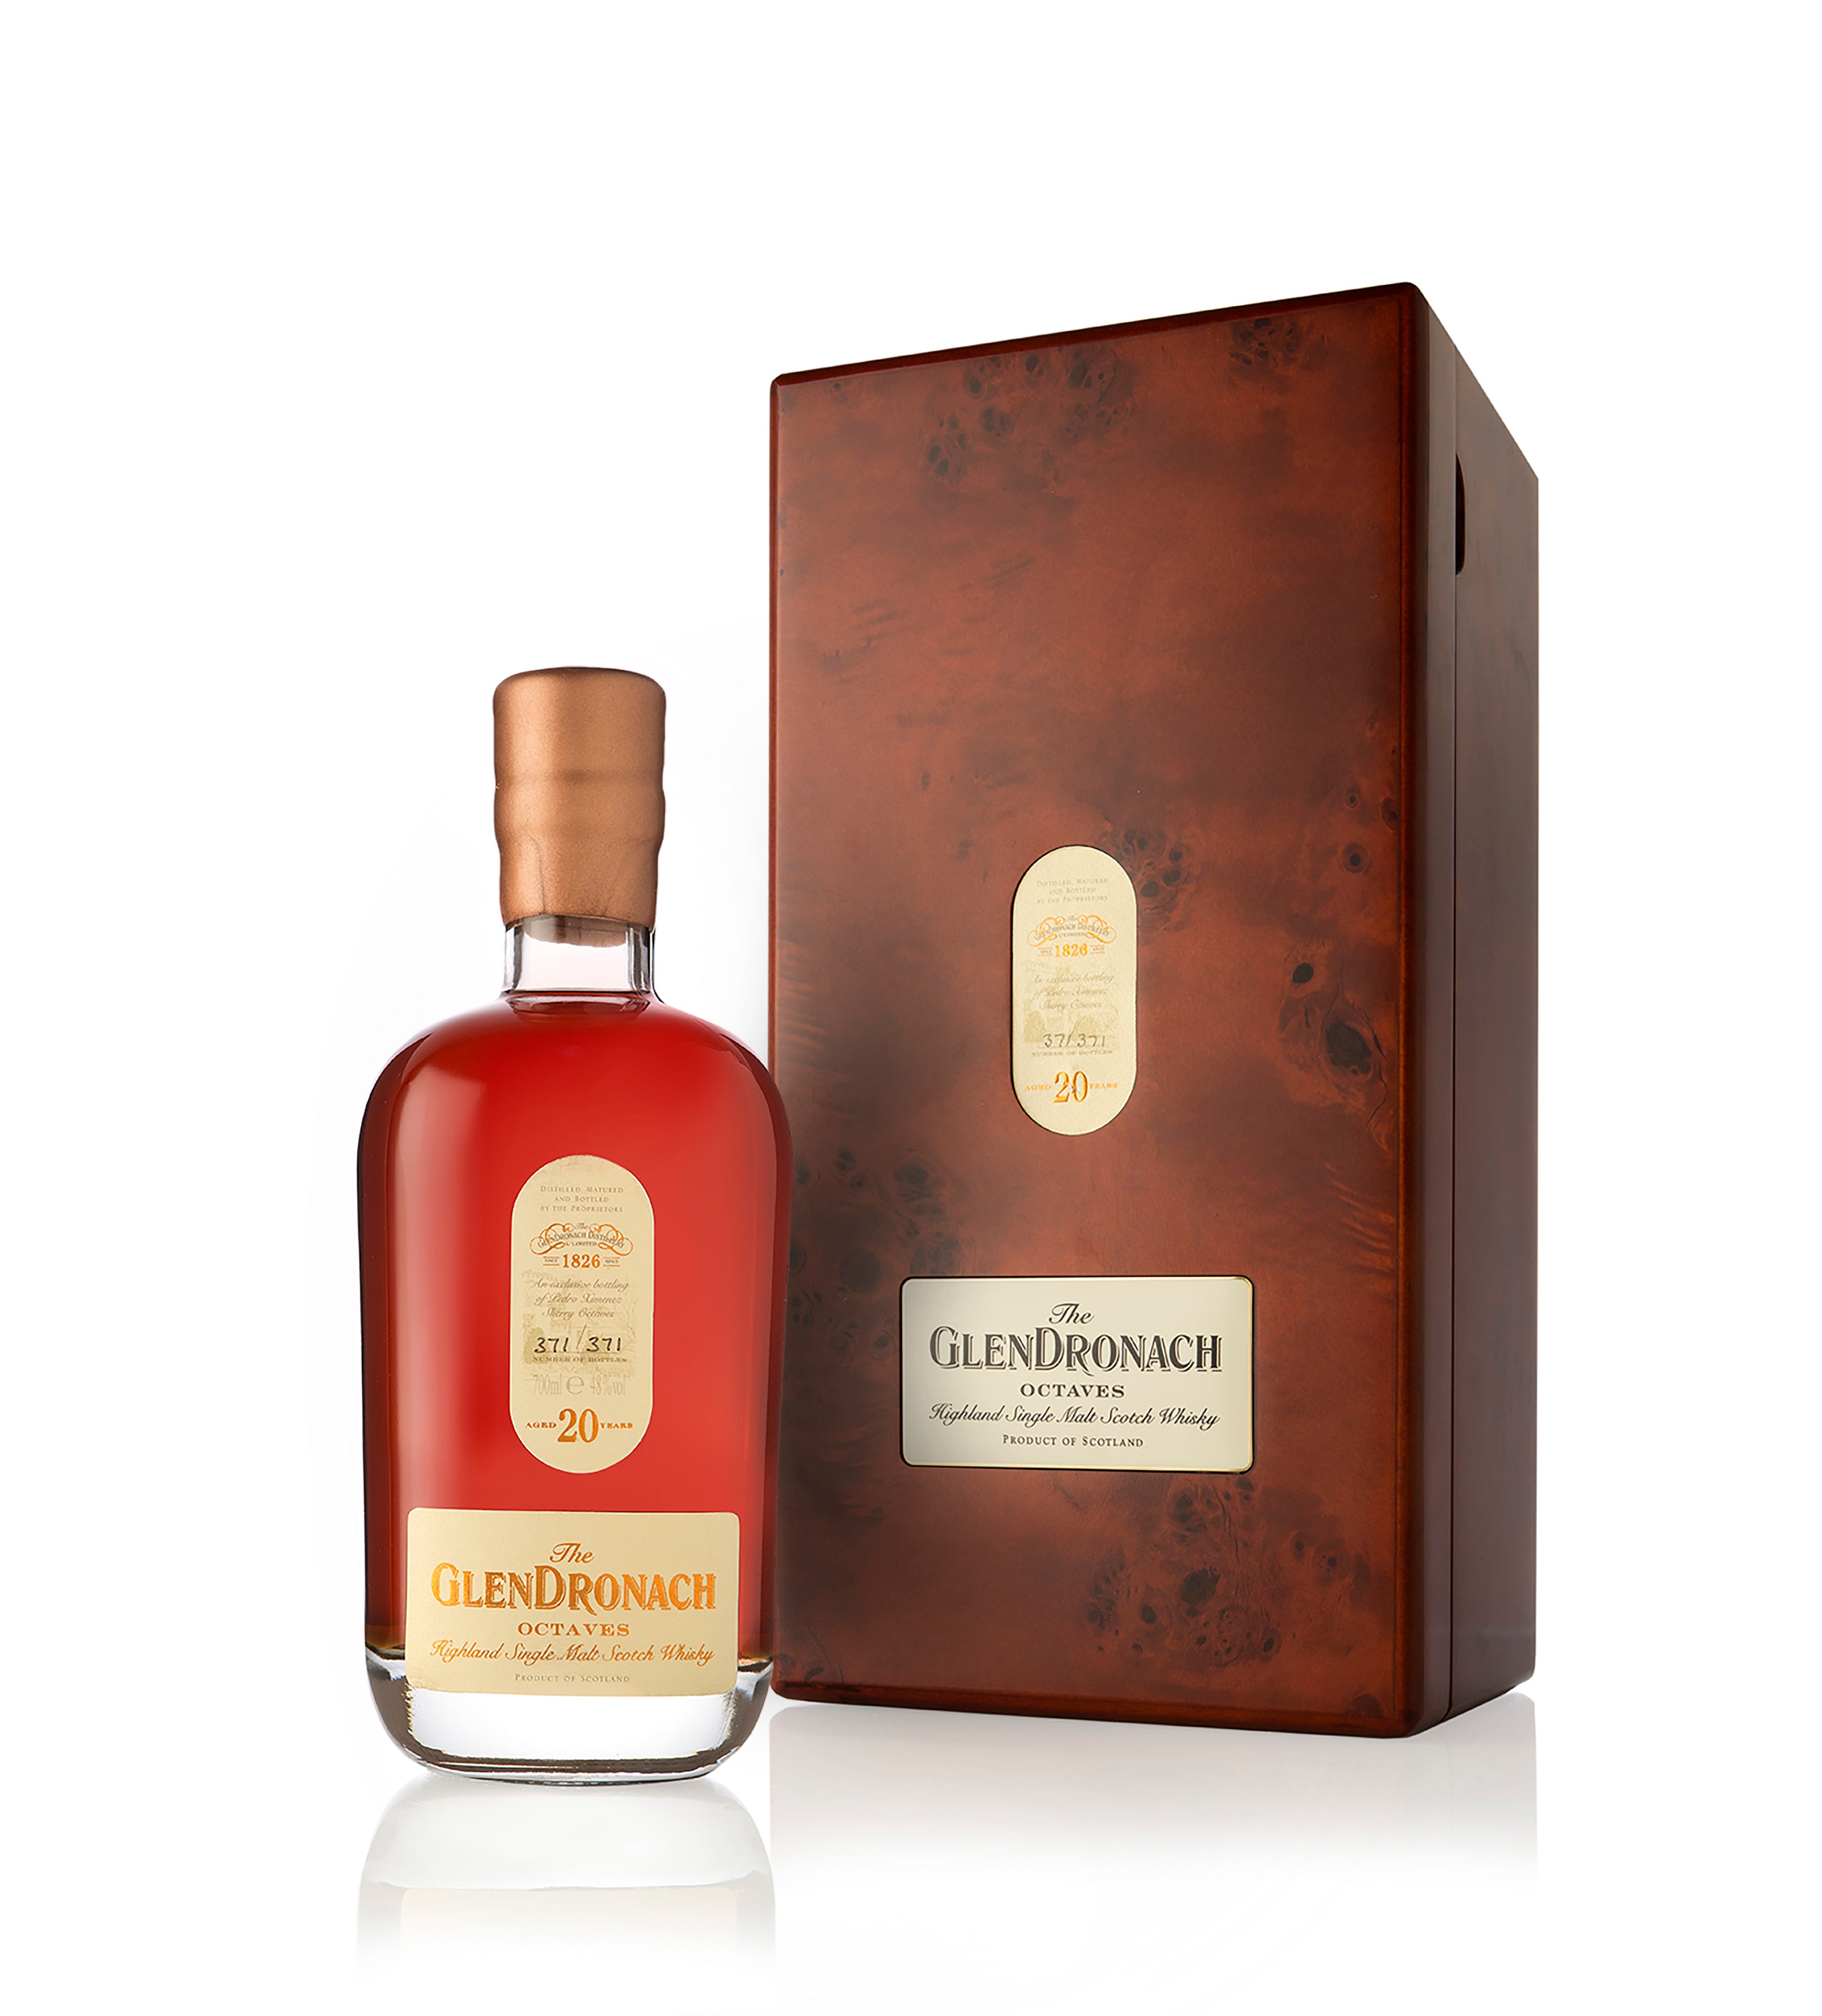 GlenDronach Octaves 20 Year Old - Vintage 1994